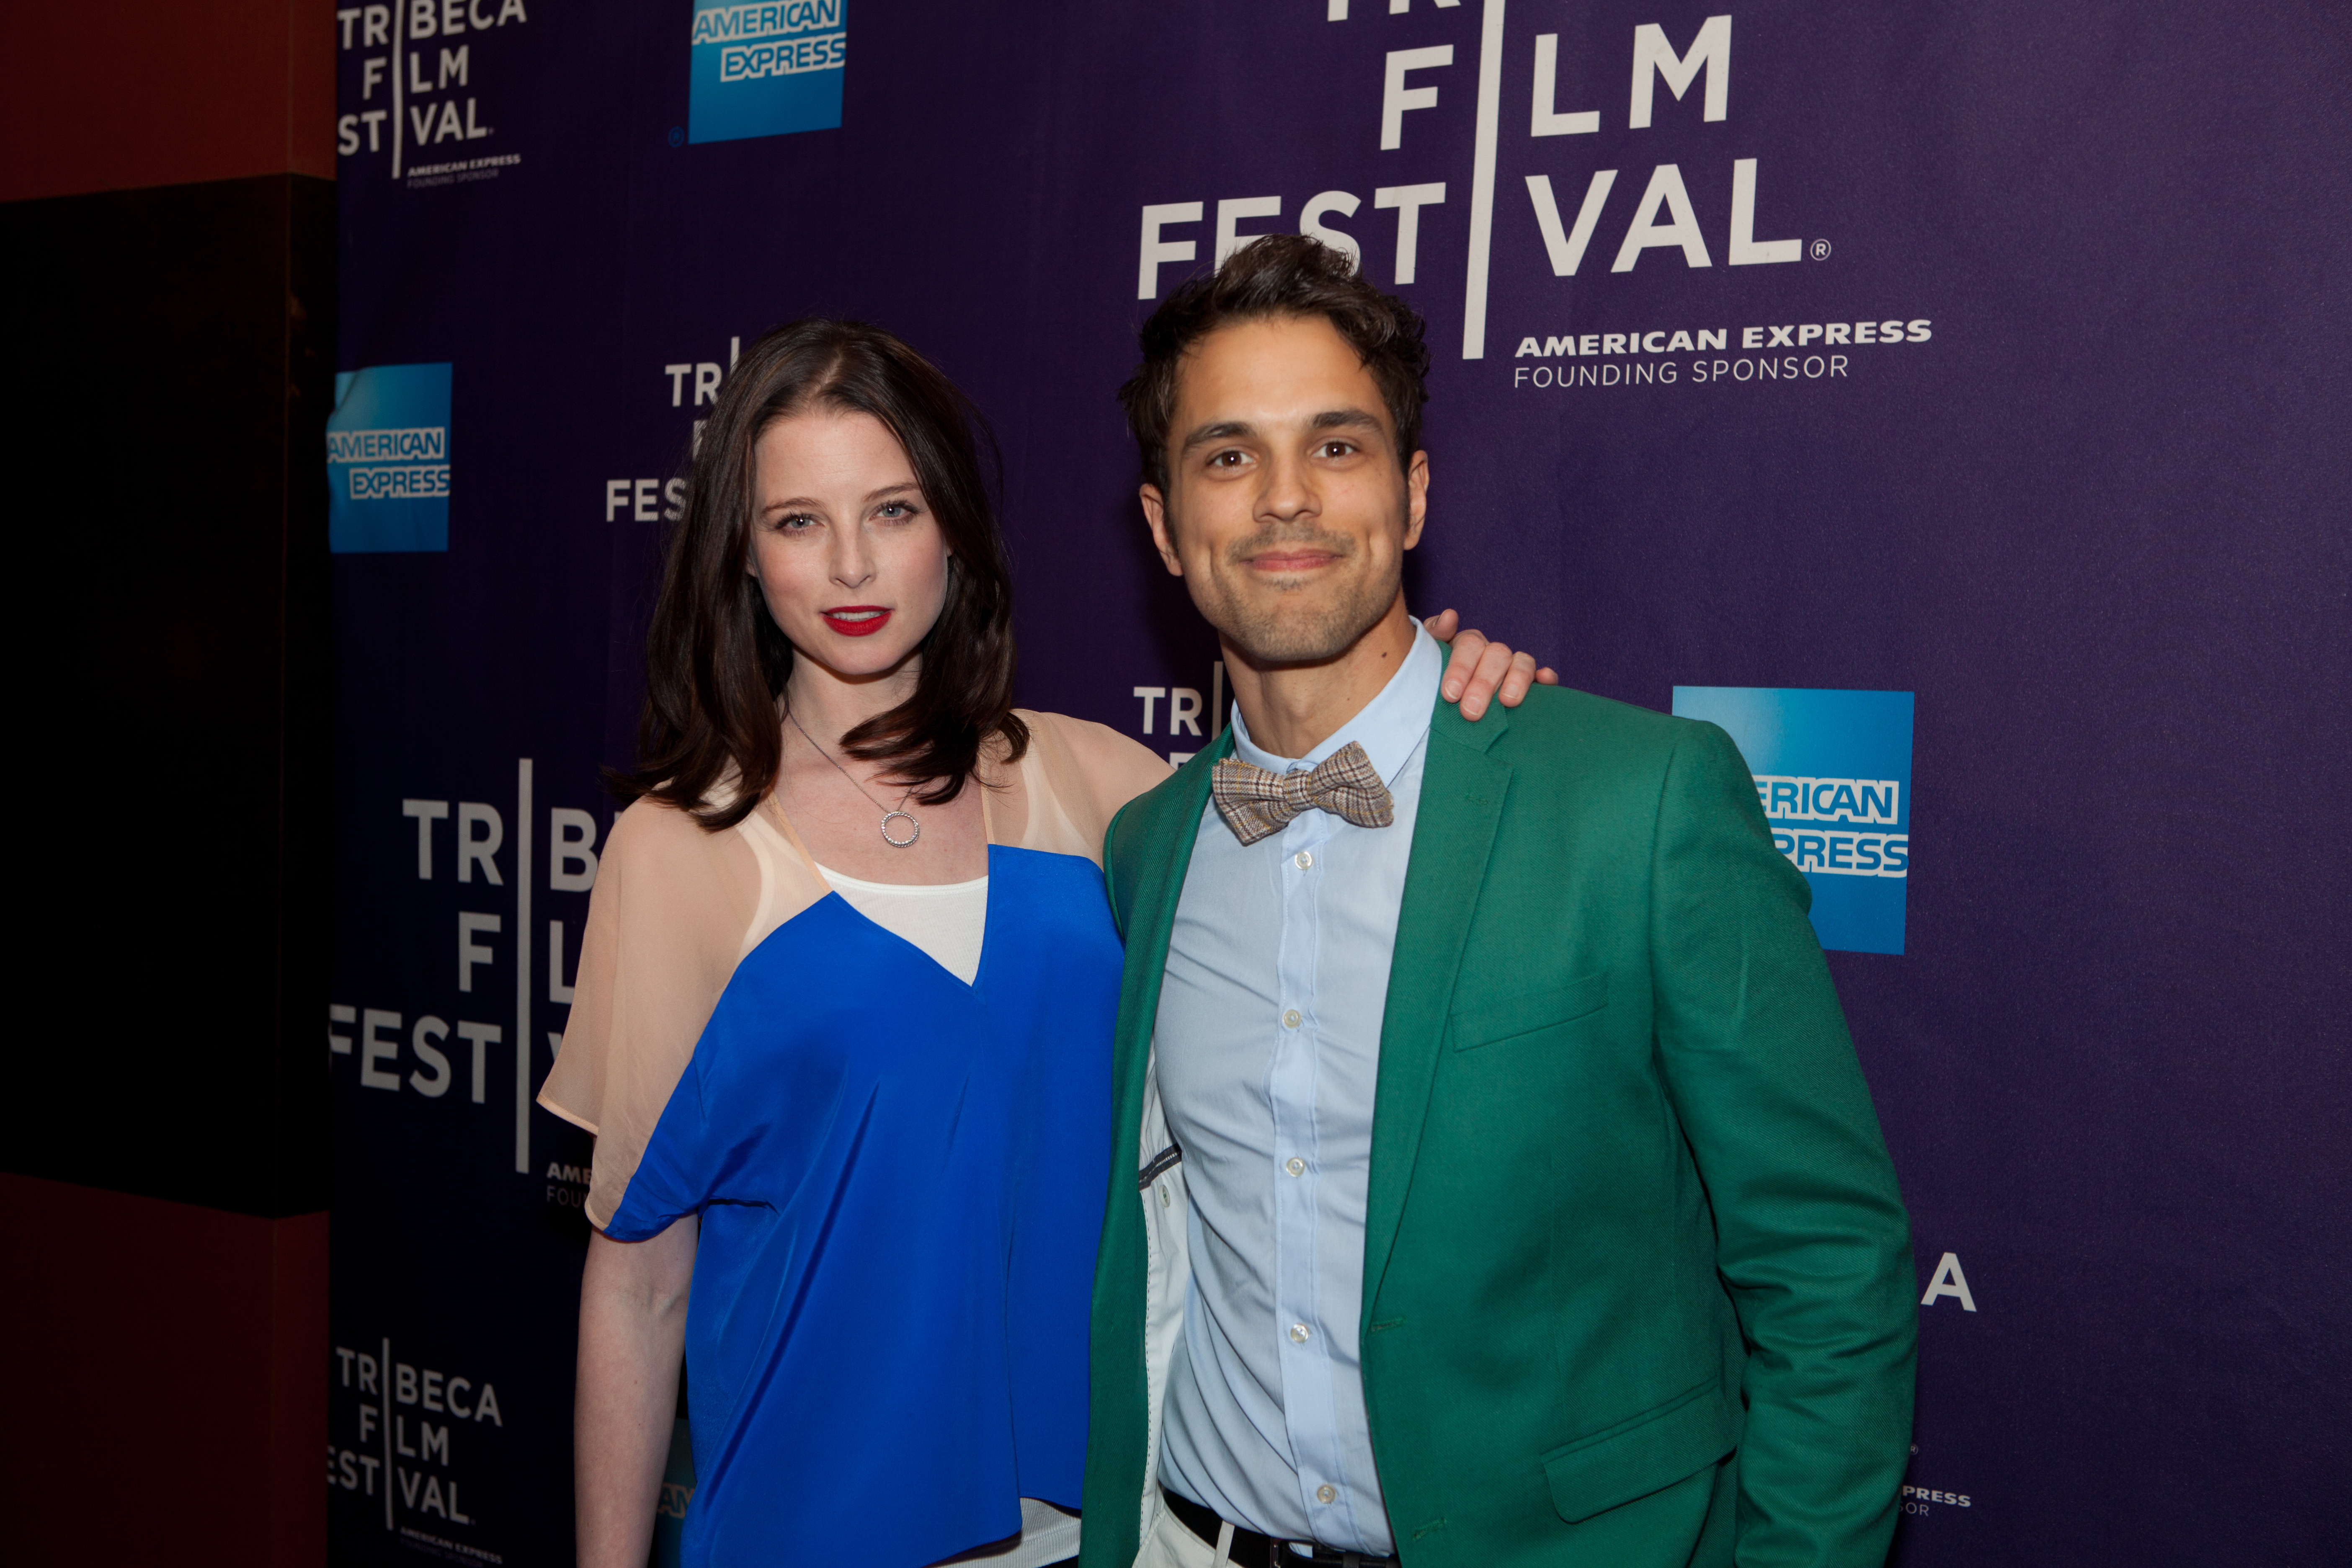 Jordan James Smith and Rachel Nichols at the premiere of 